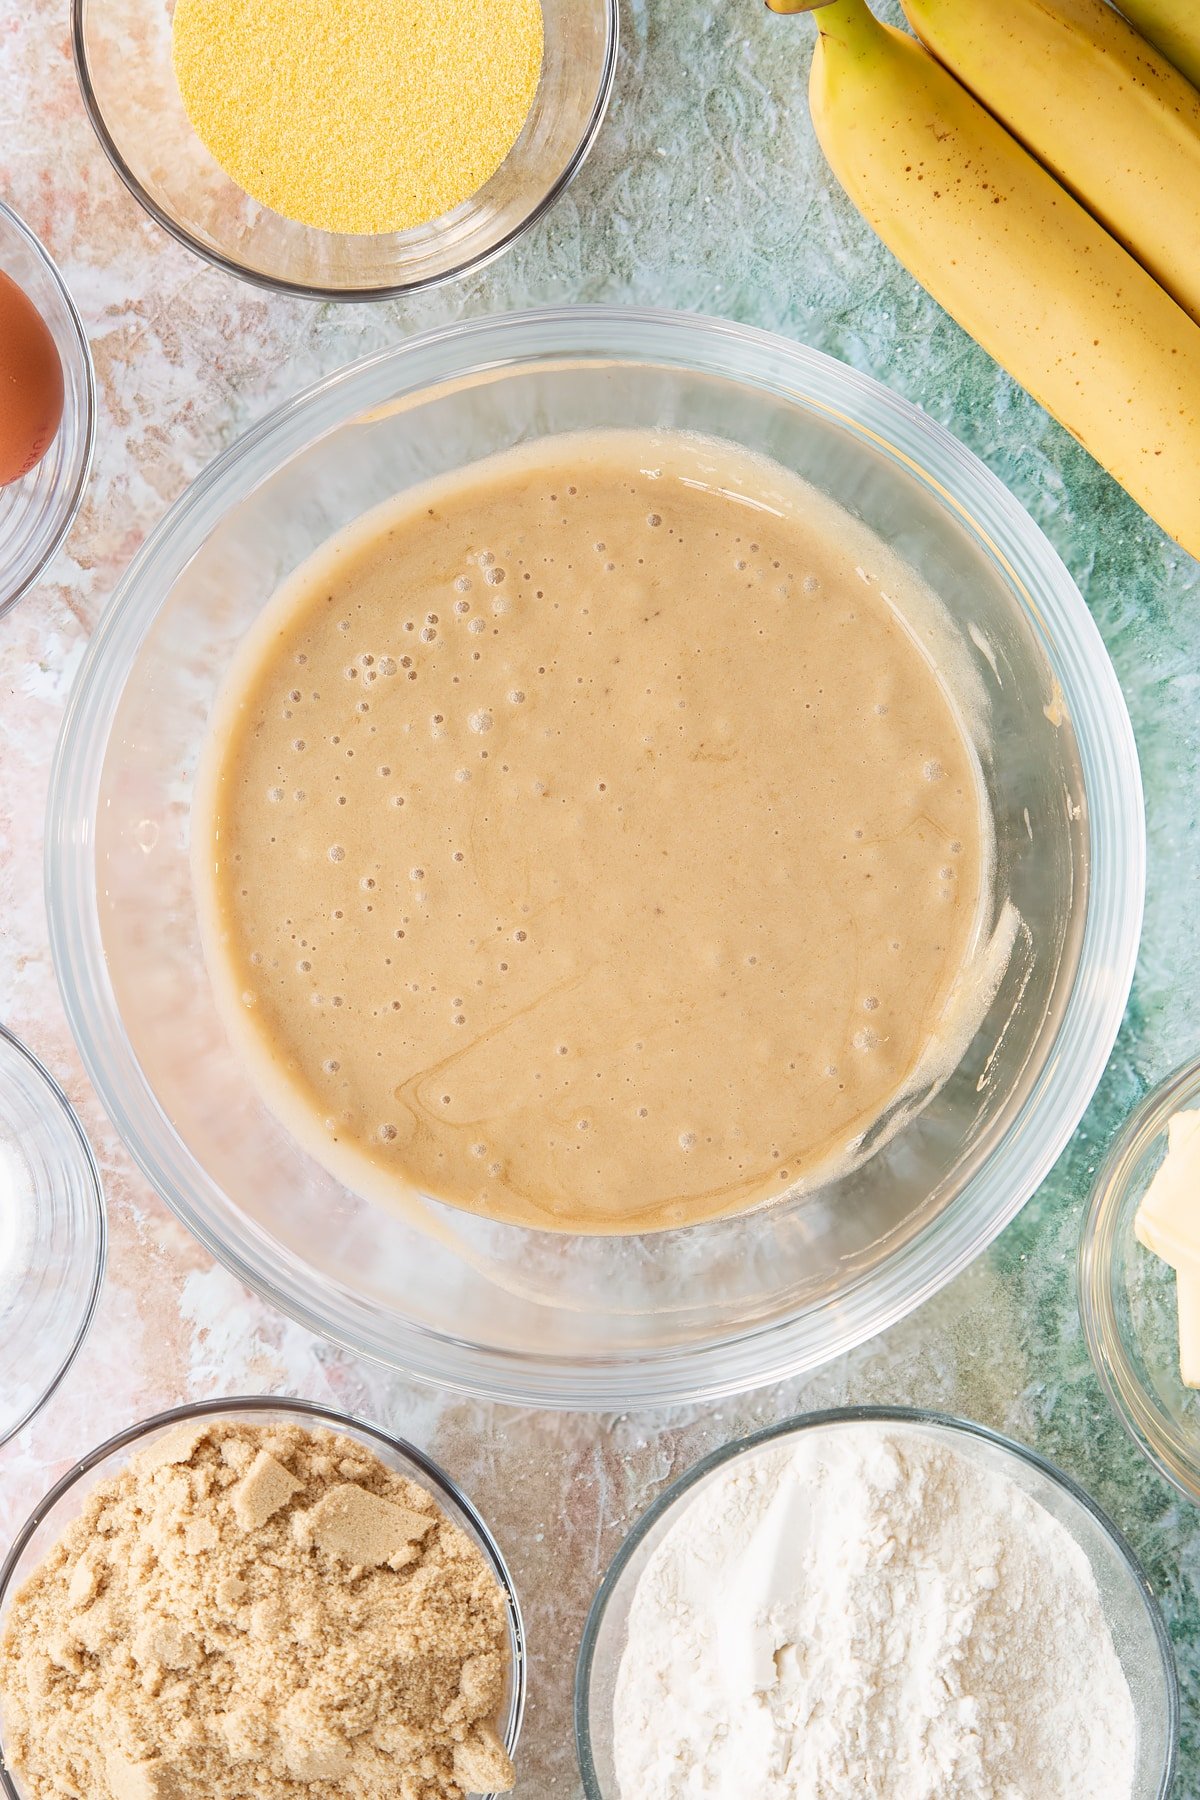 Mashed bananas and sugar mixed together in a bowl. Ingredients to make banana cornmeal muffin surround the bowl.